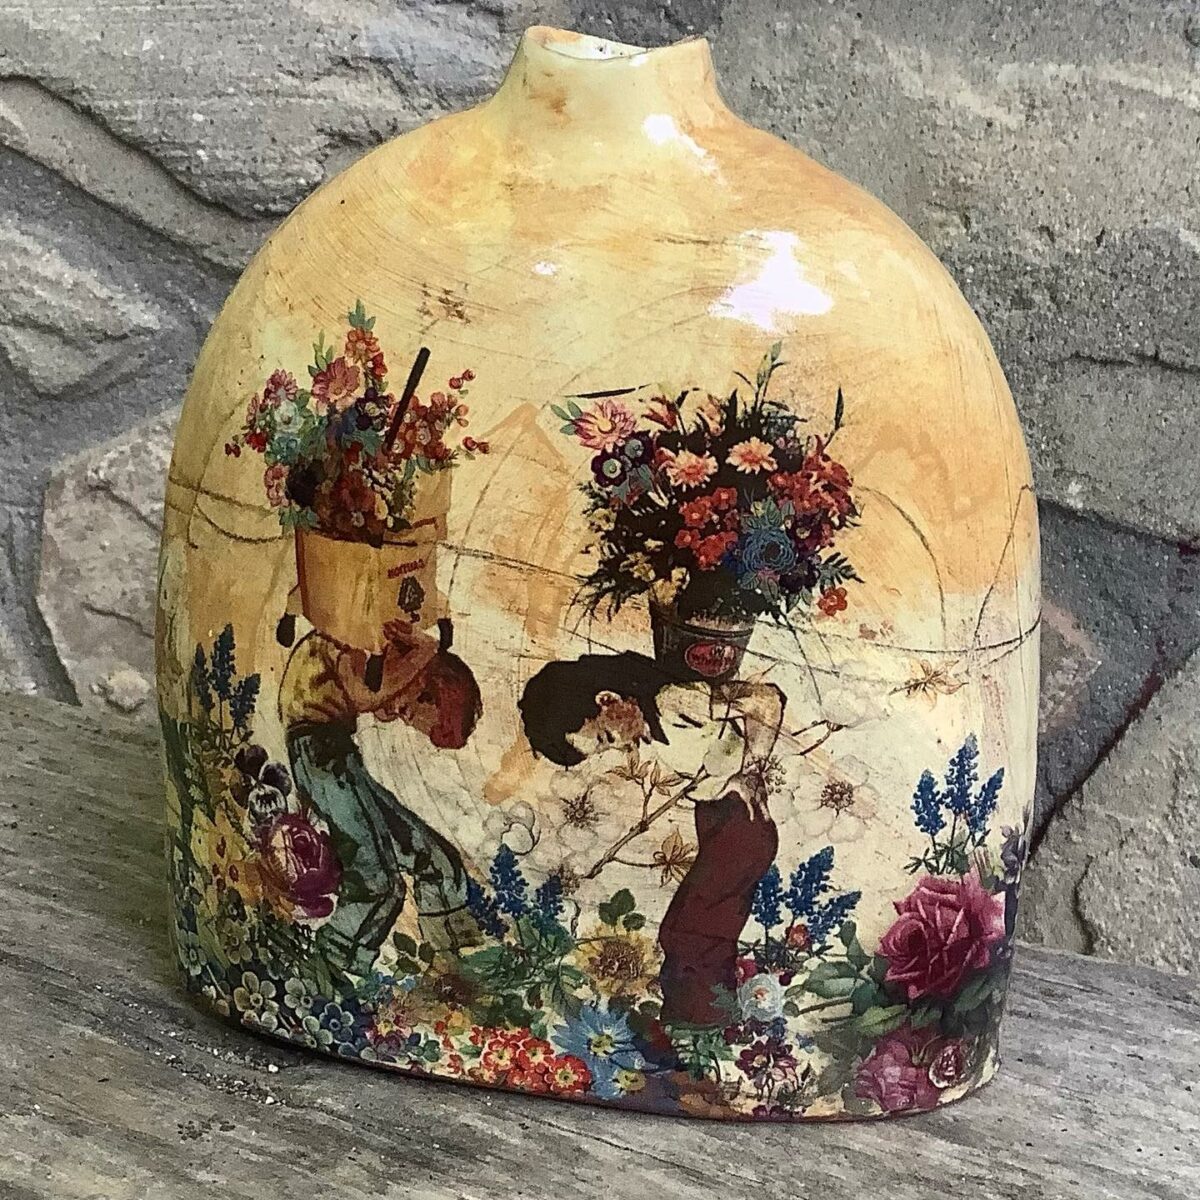 Gorgeous Earthenware Vessels Decorated With Vintage Imagery By Eric Pardue (4)